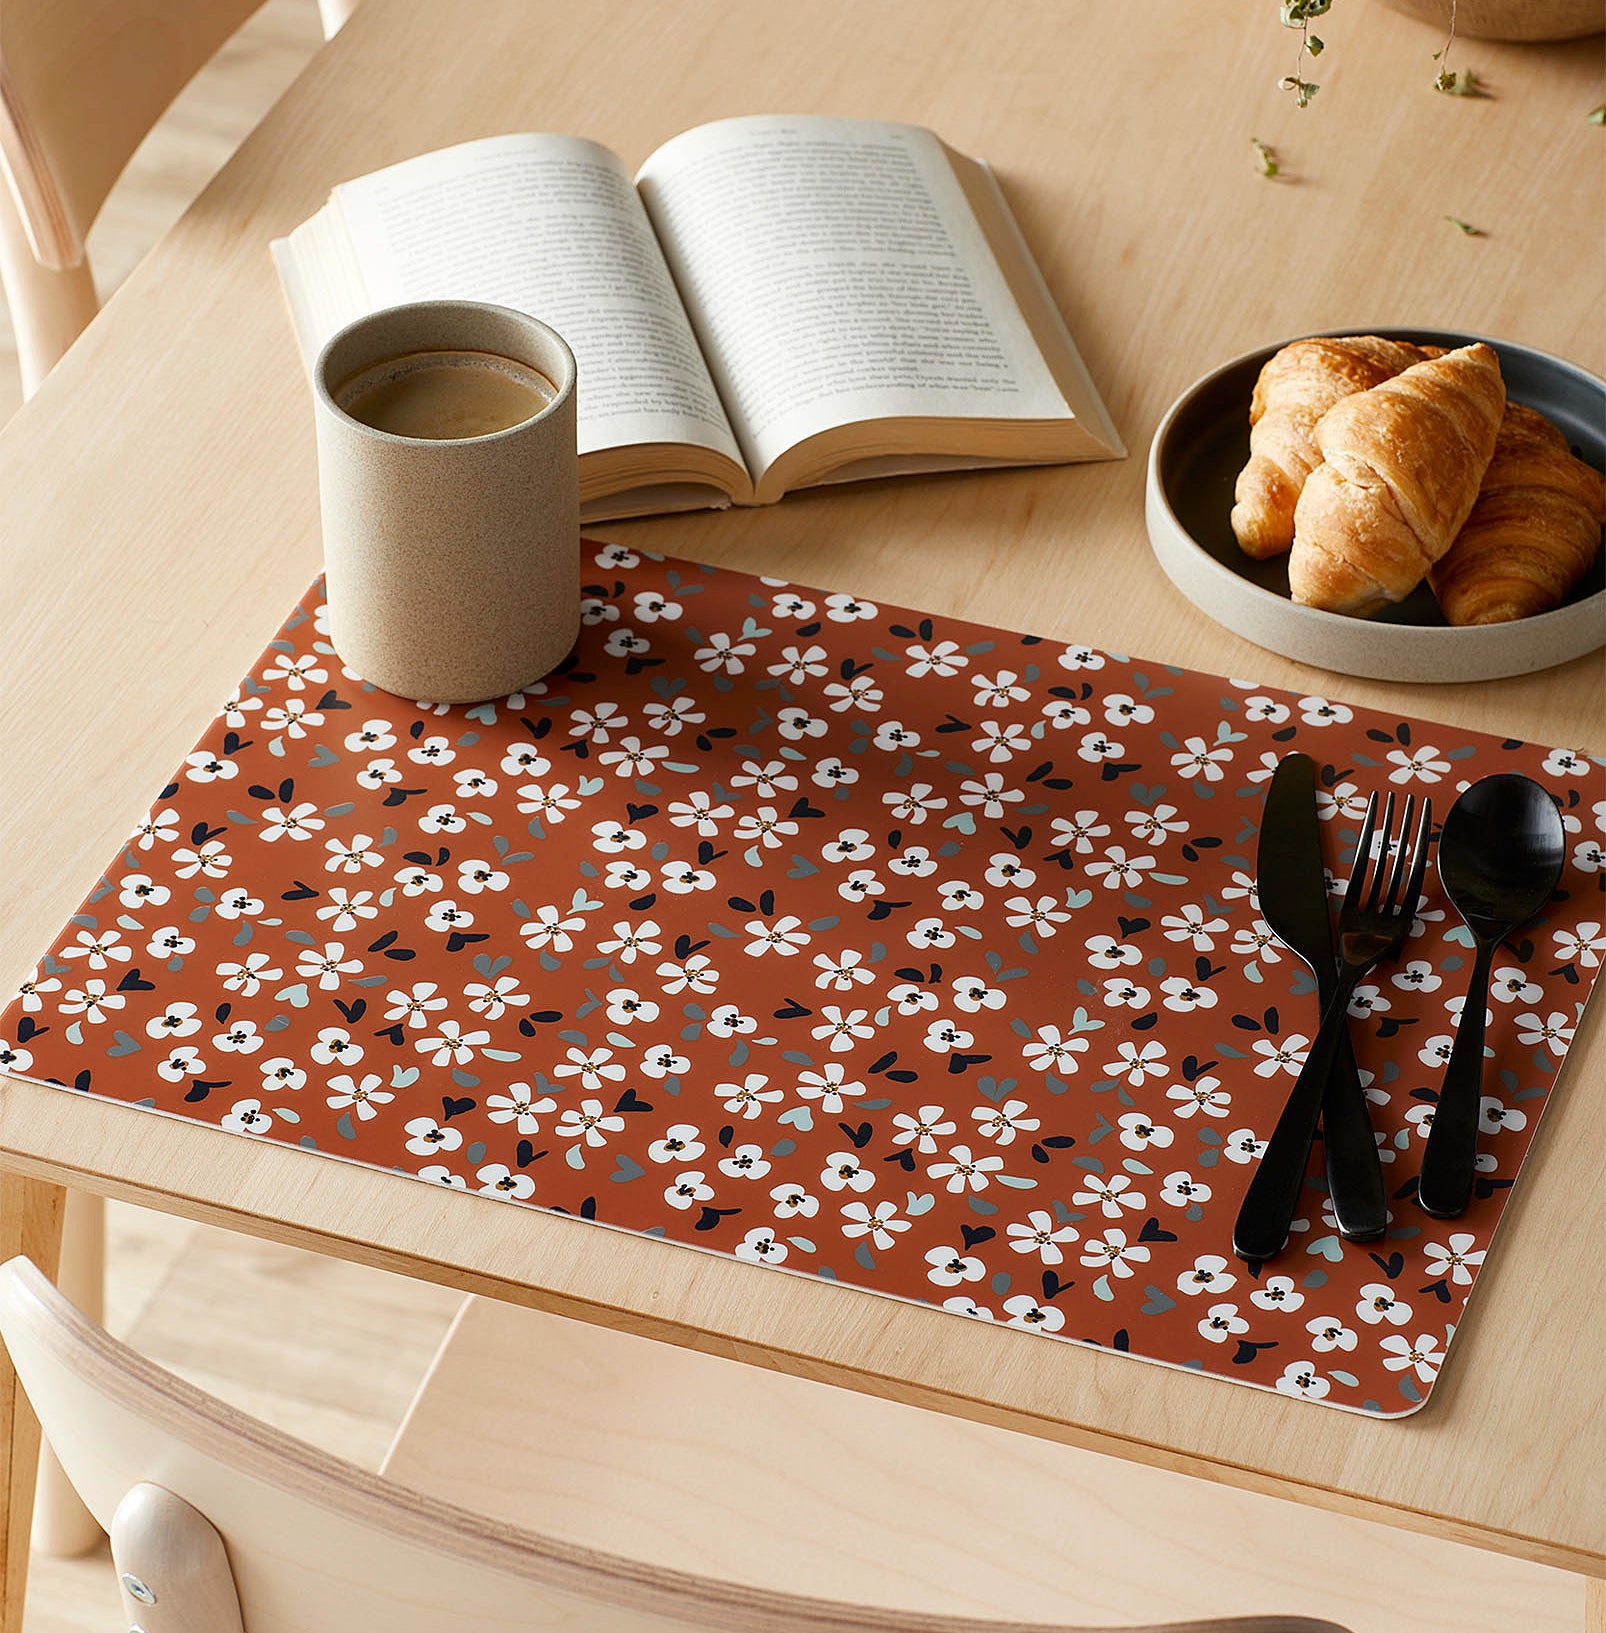 The floral placemat on a wooden table 